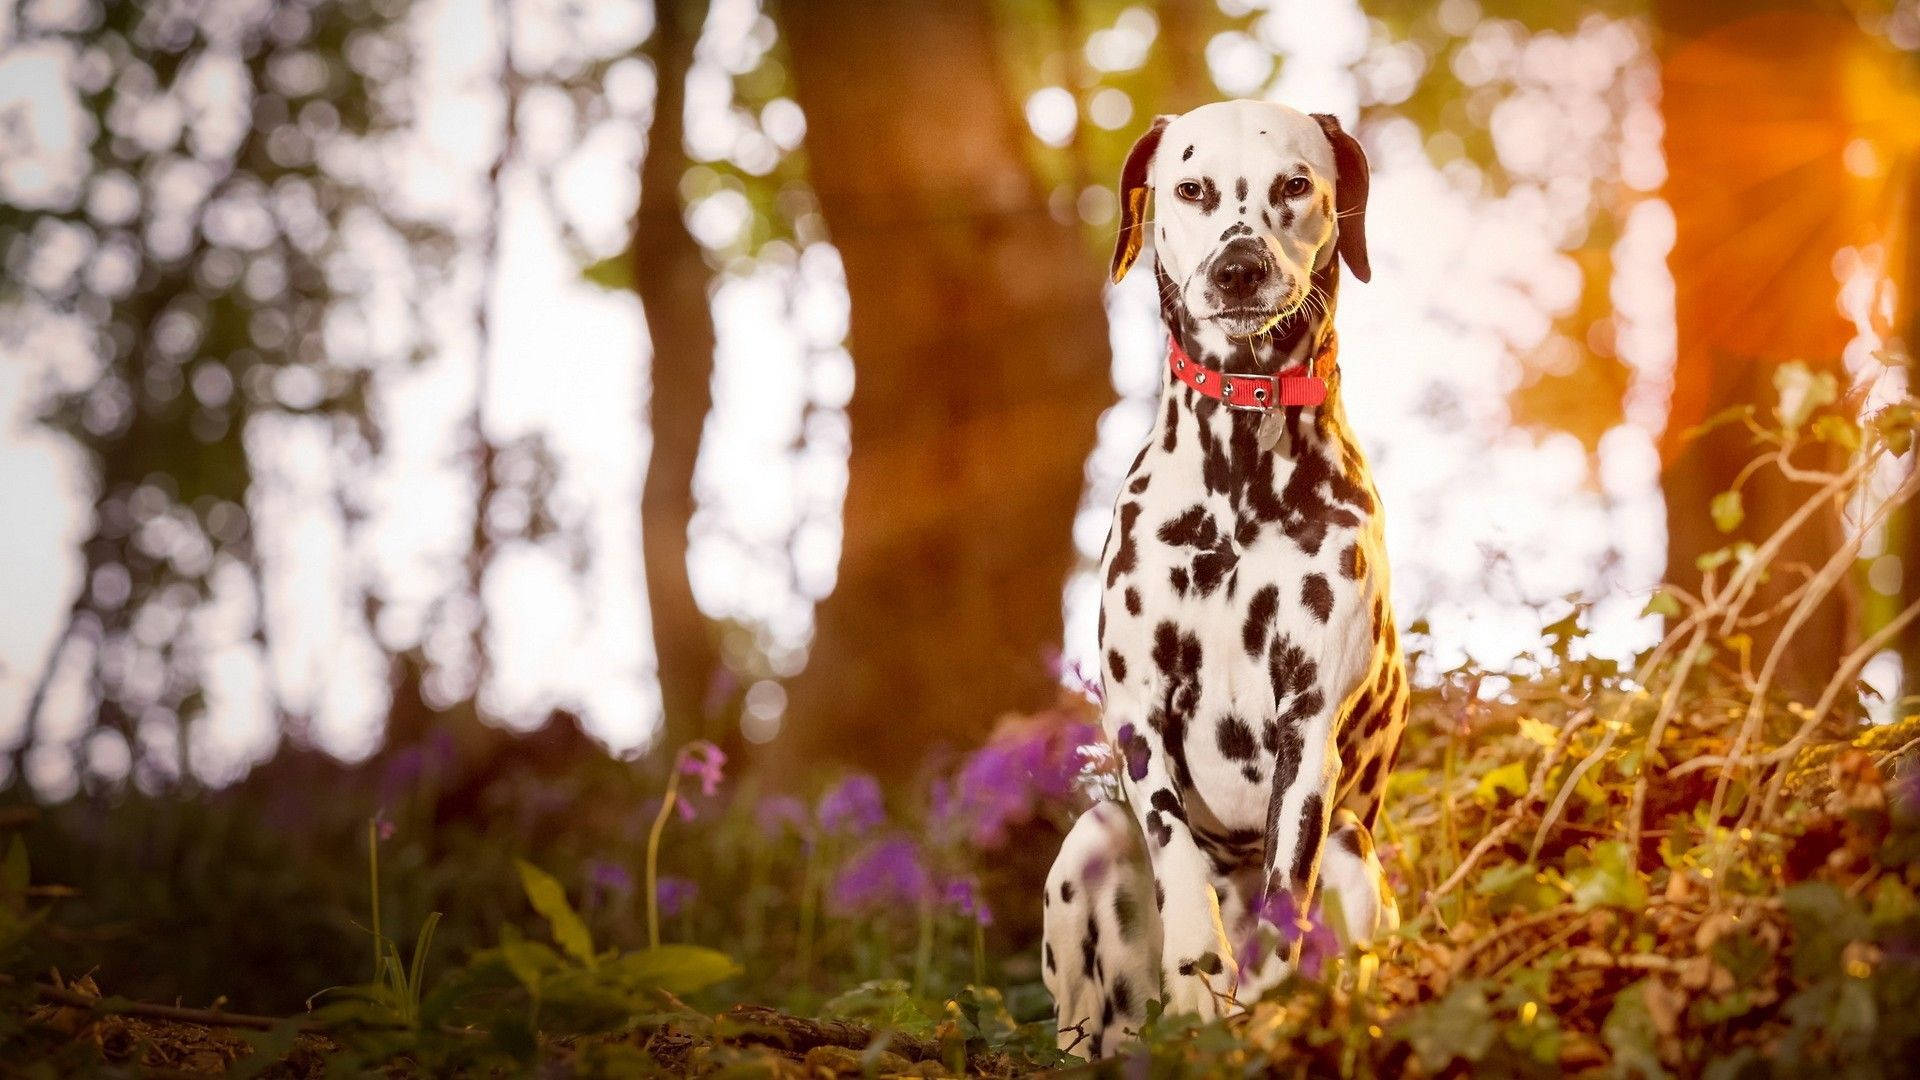 Dalmatian Dog In Magical Forest Background